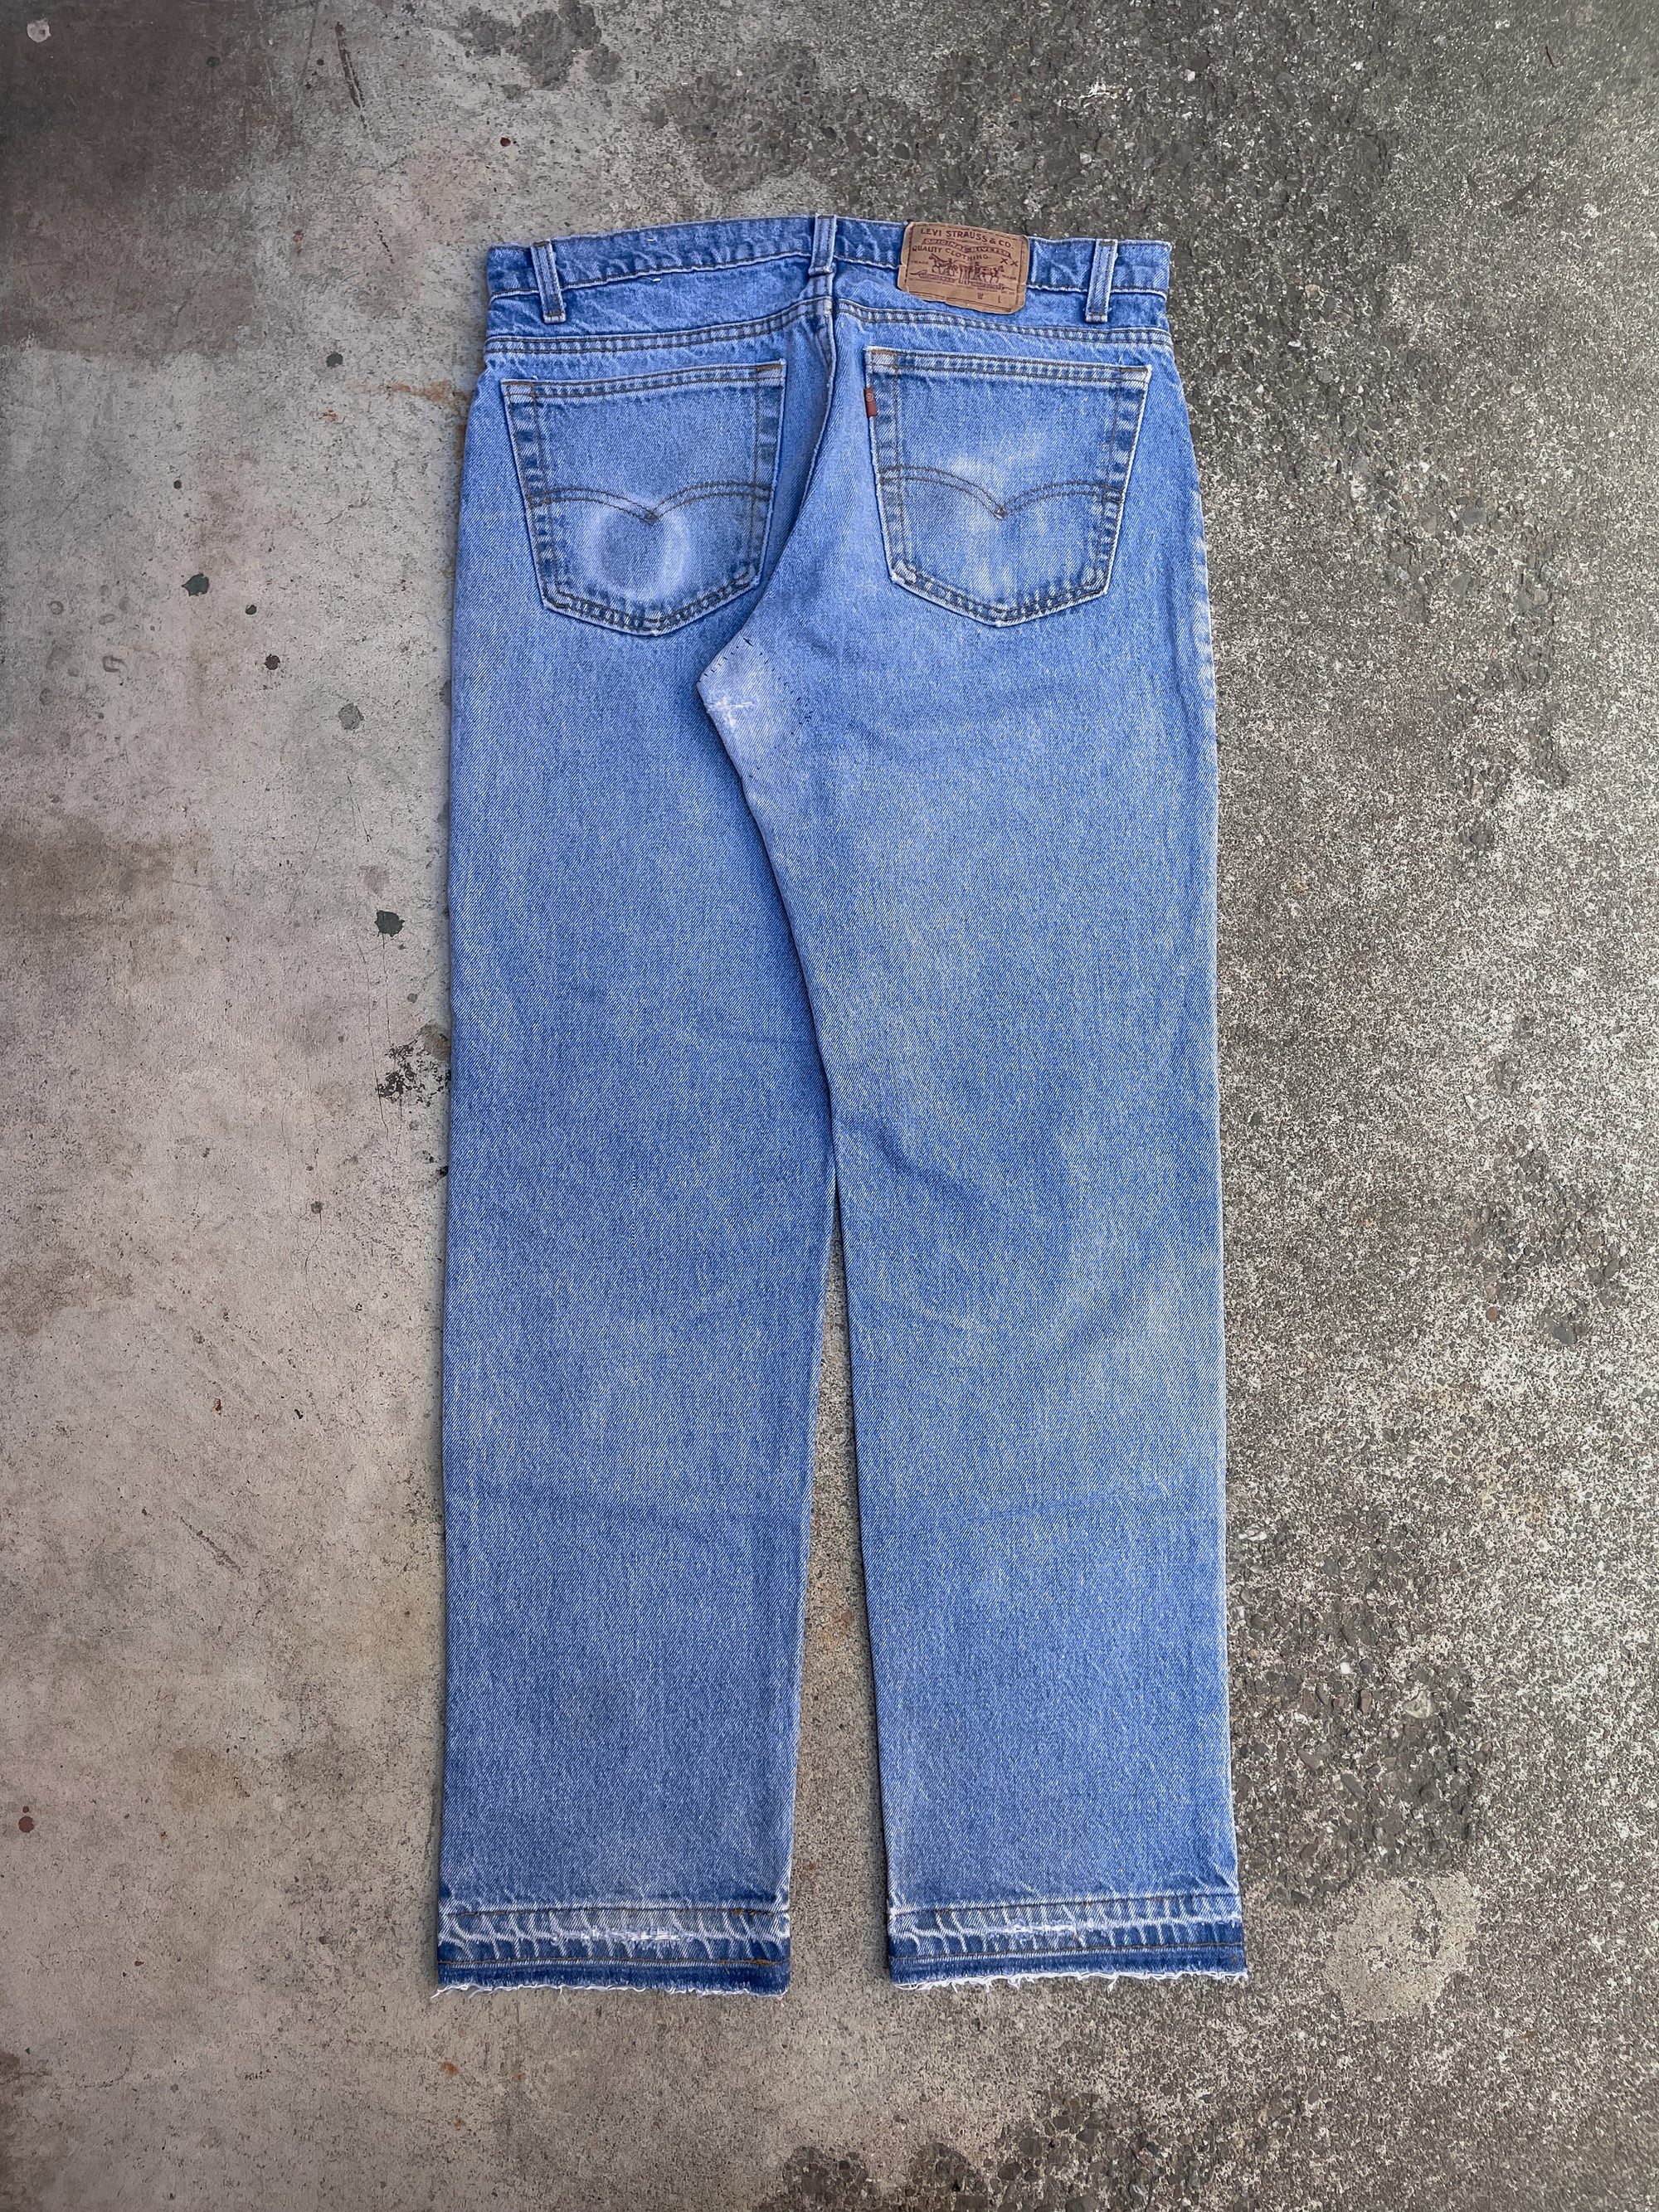 1980s Levi’s Repaired Faded Blue 506 Released Hem (33X30)